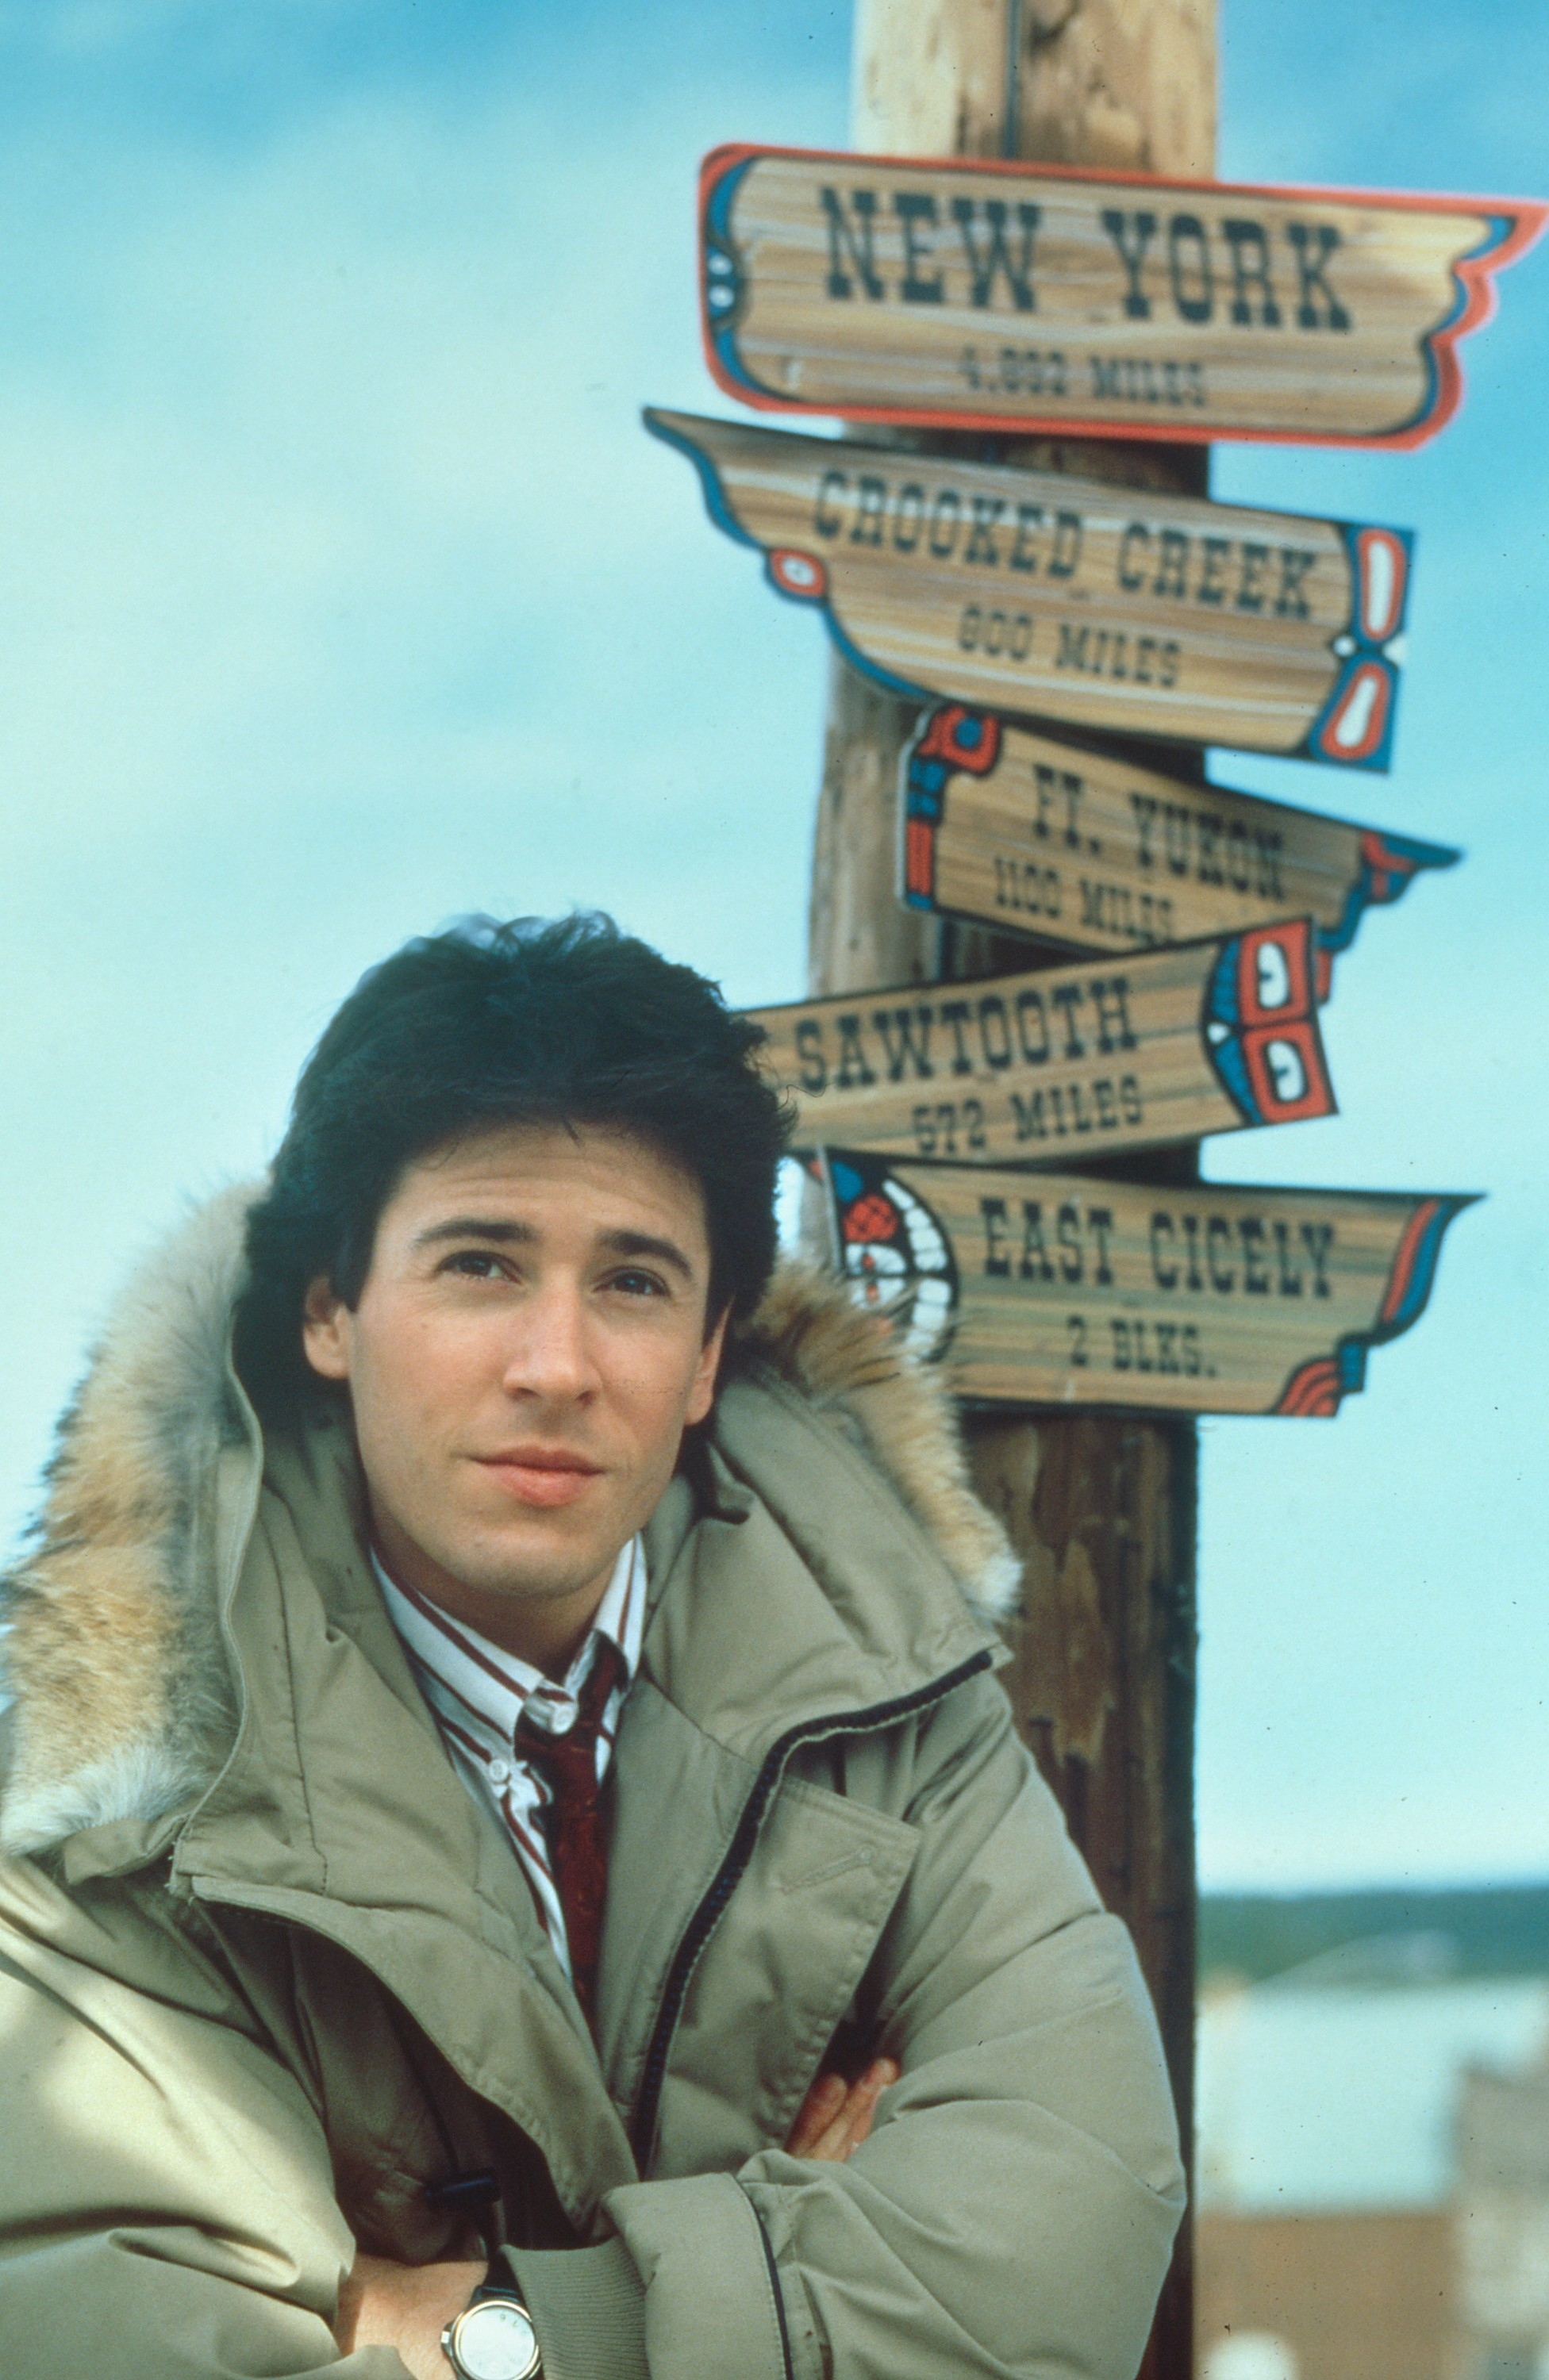 Man in parka by signpost with directional signs; relevant for &quot;Northern Exposure&quot; TV show